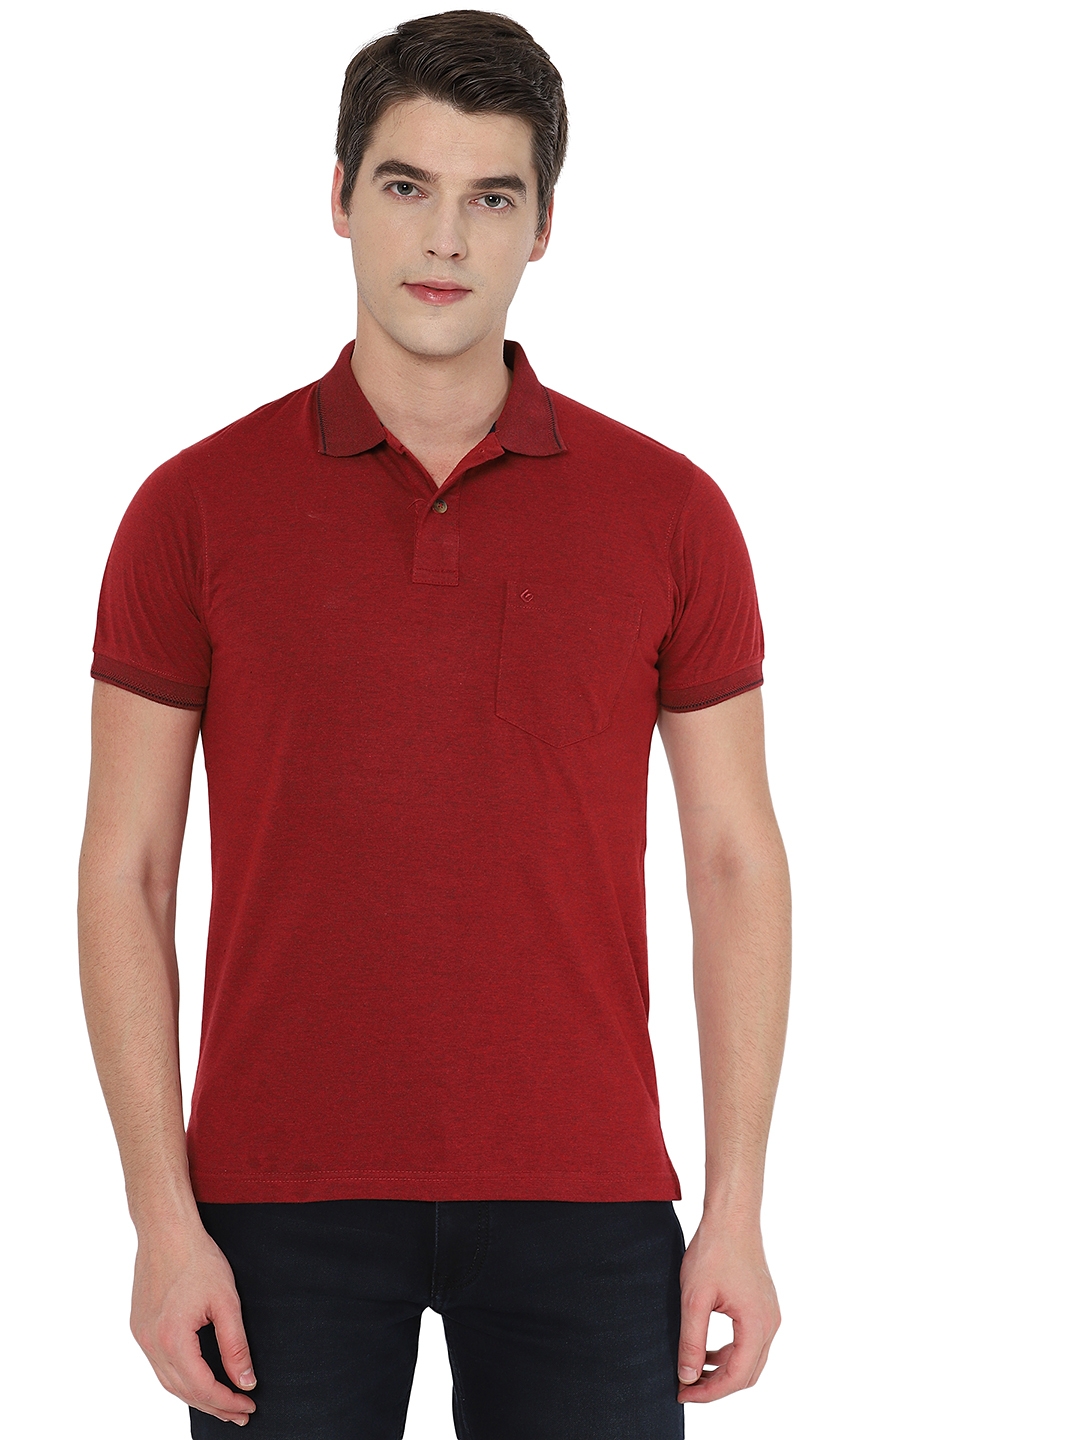 Greenfibre | Red Solid Slim Fit Polo T-Shirt | Greenfibre